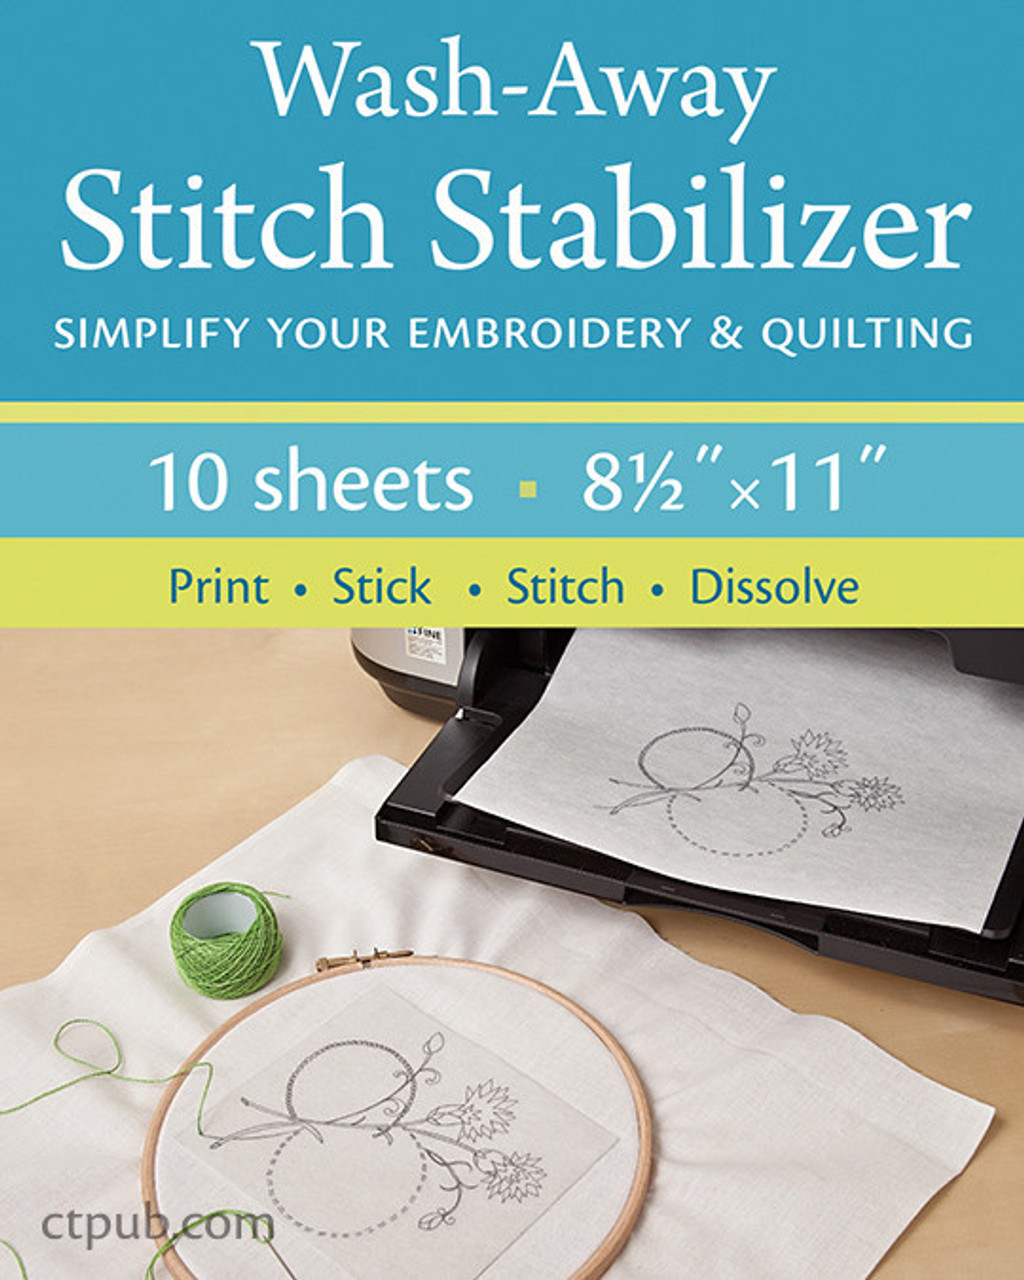 All About Embroidery and Stabilizer